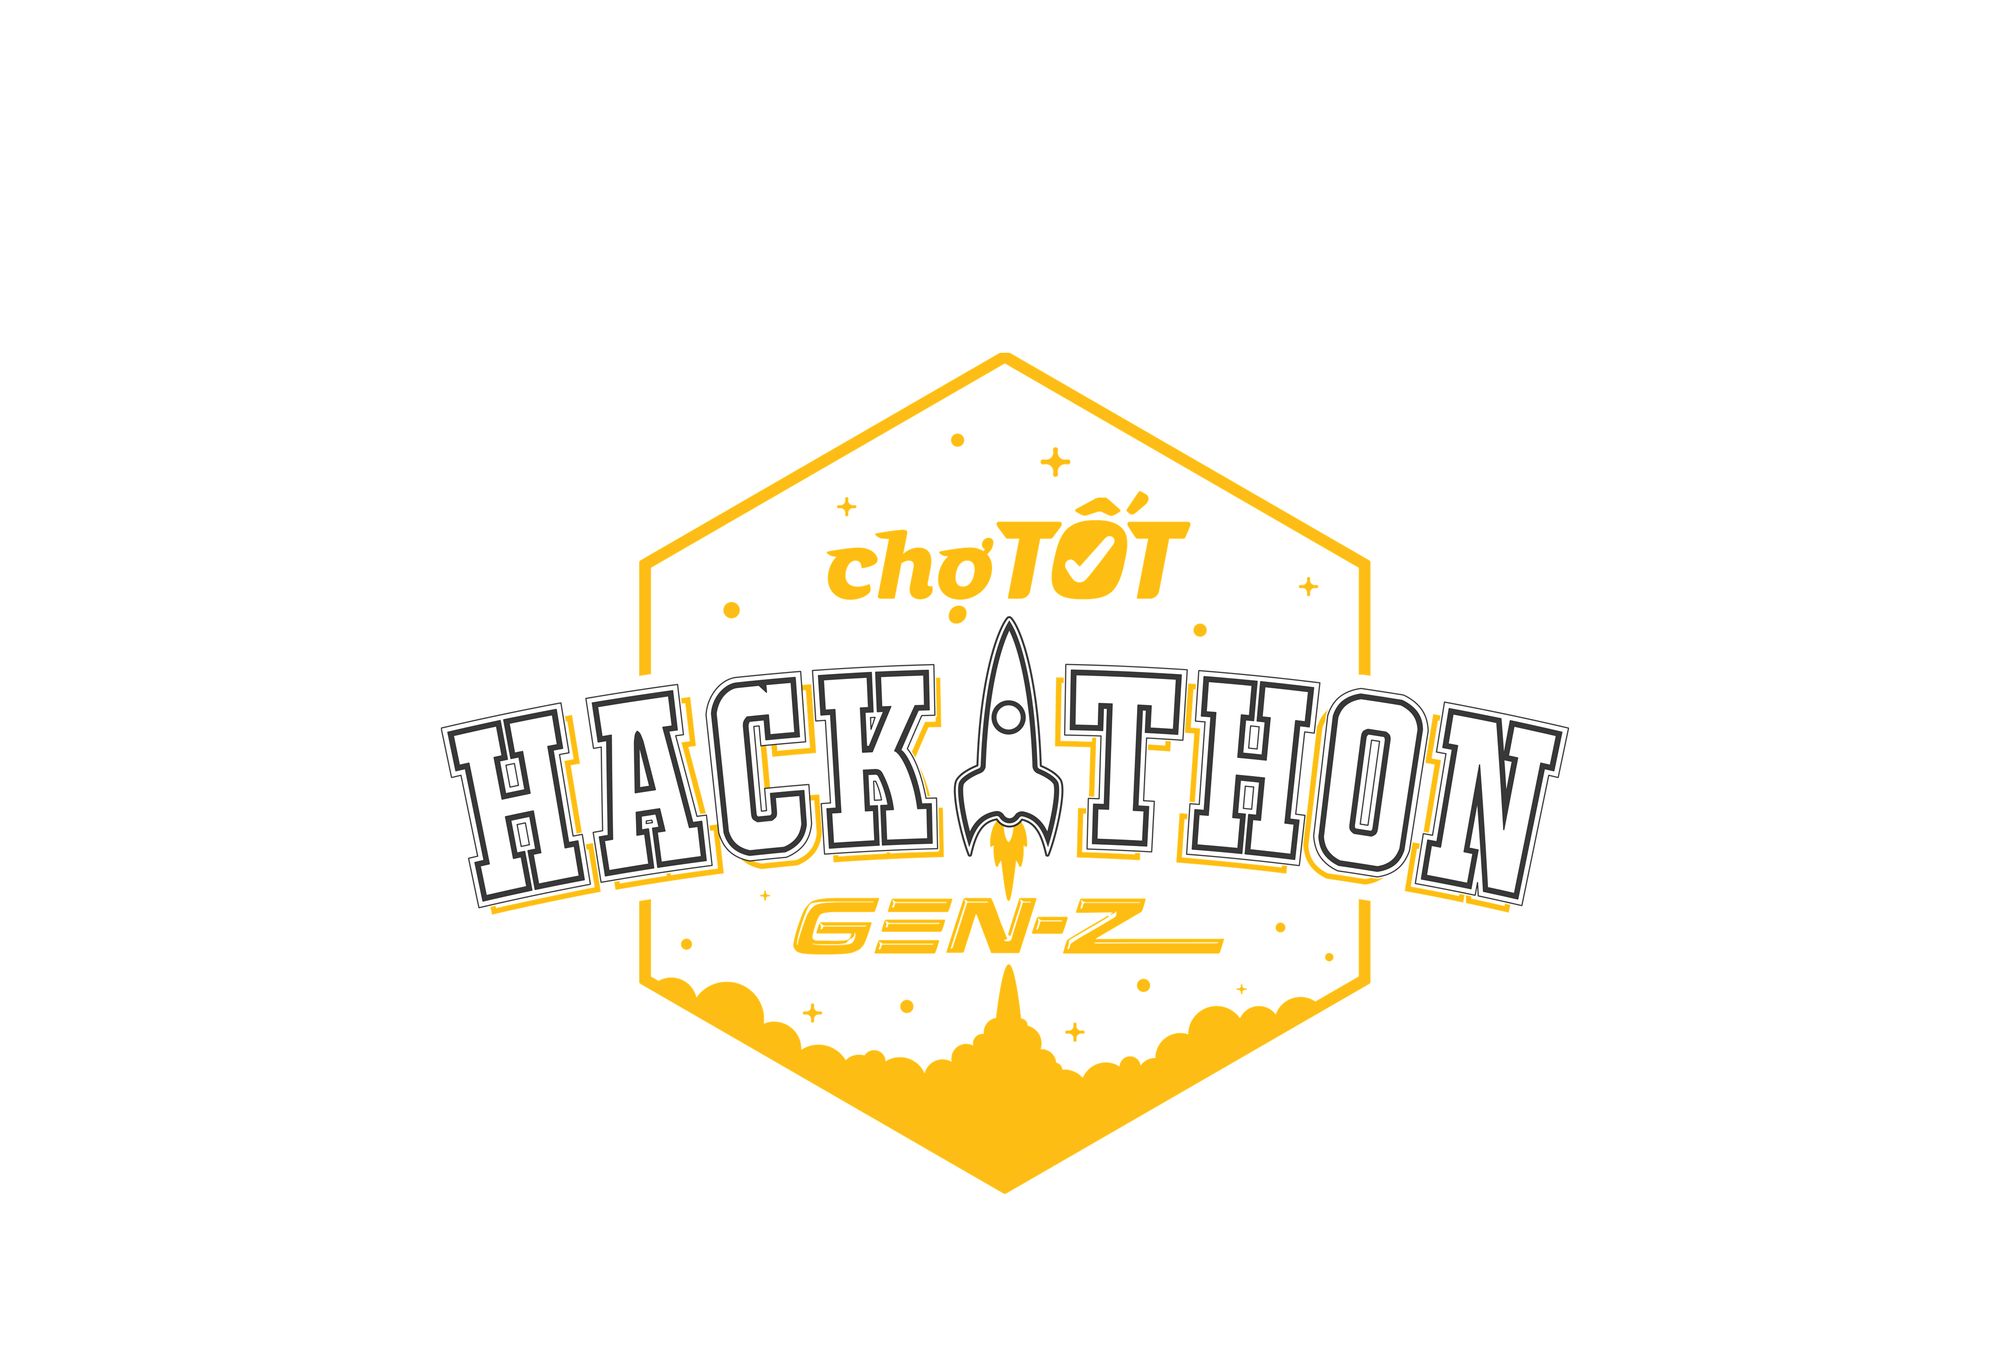 Cover for “Make Chotot tuyet for Gen Z” Hackathon – We can build a product in roughly 36 hours!